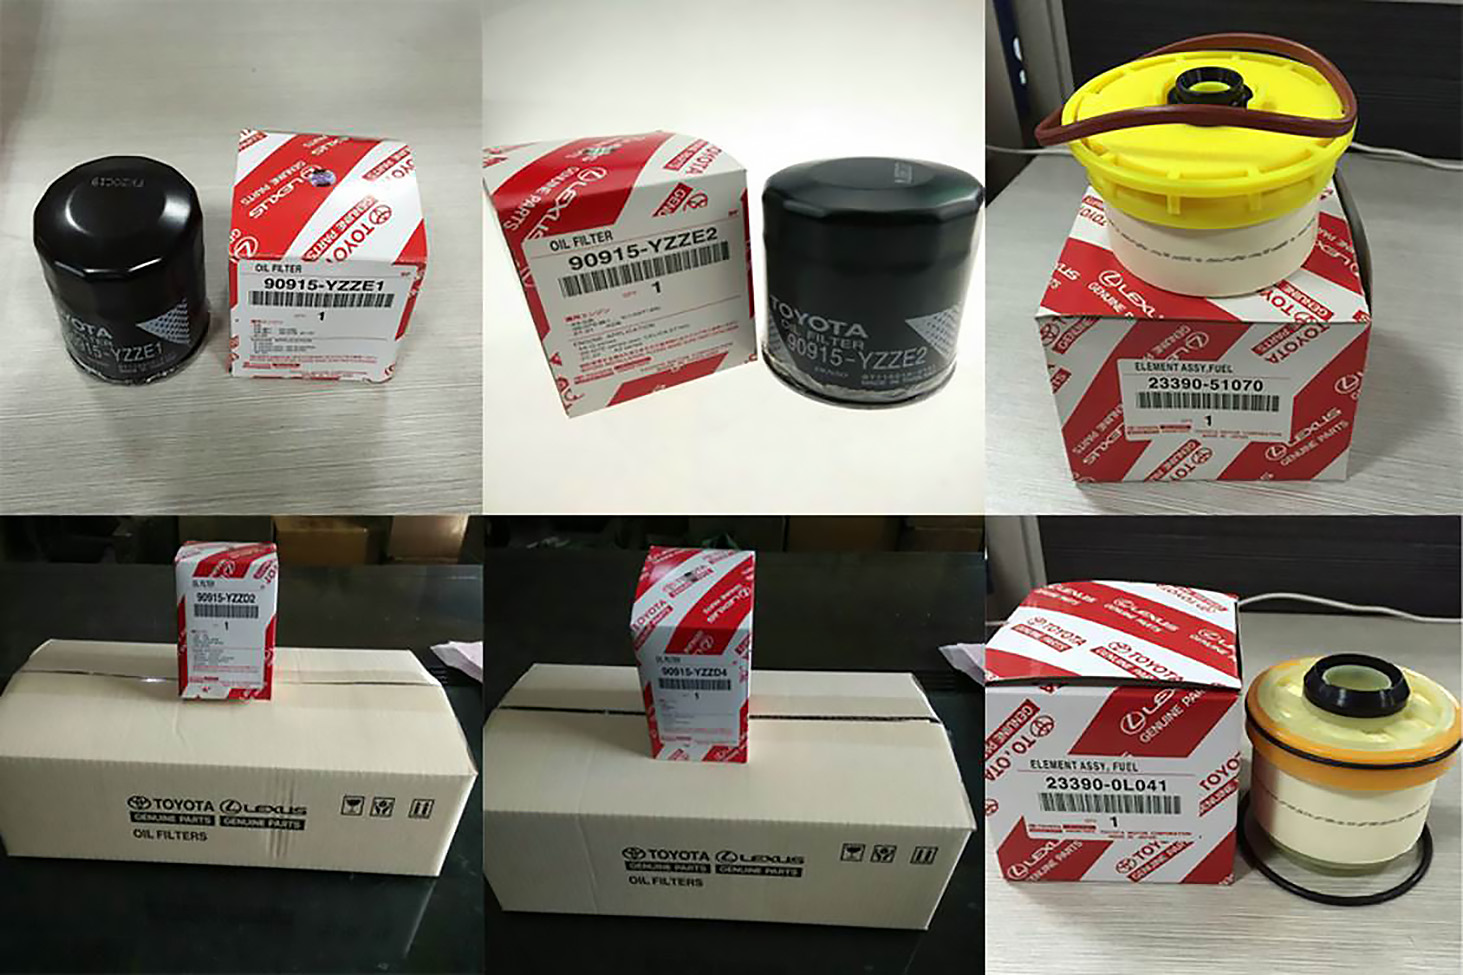 An example of counterfeit Toyota parts and packaging found in a raid by Chinese authorities. (Provided by FCAI)